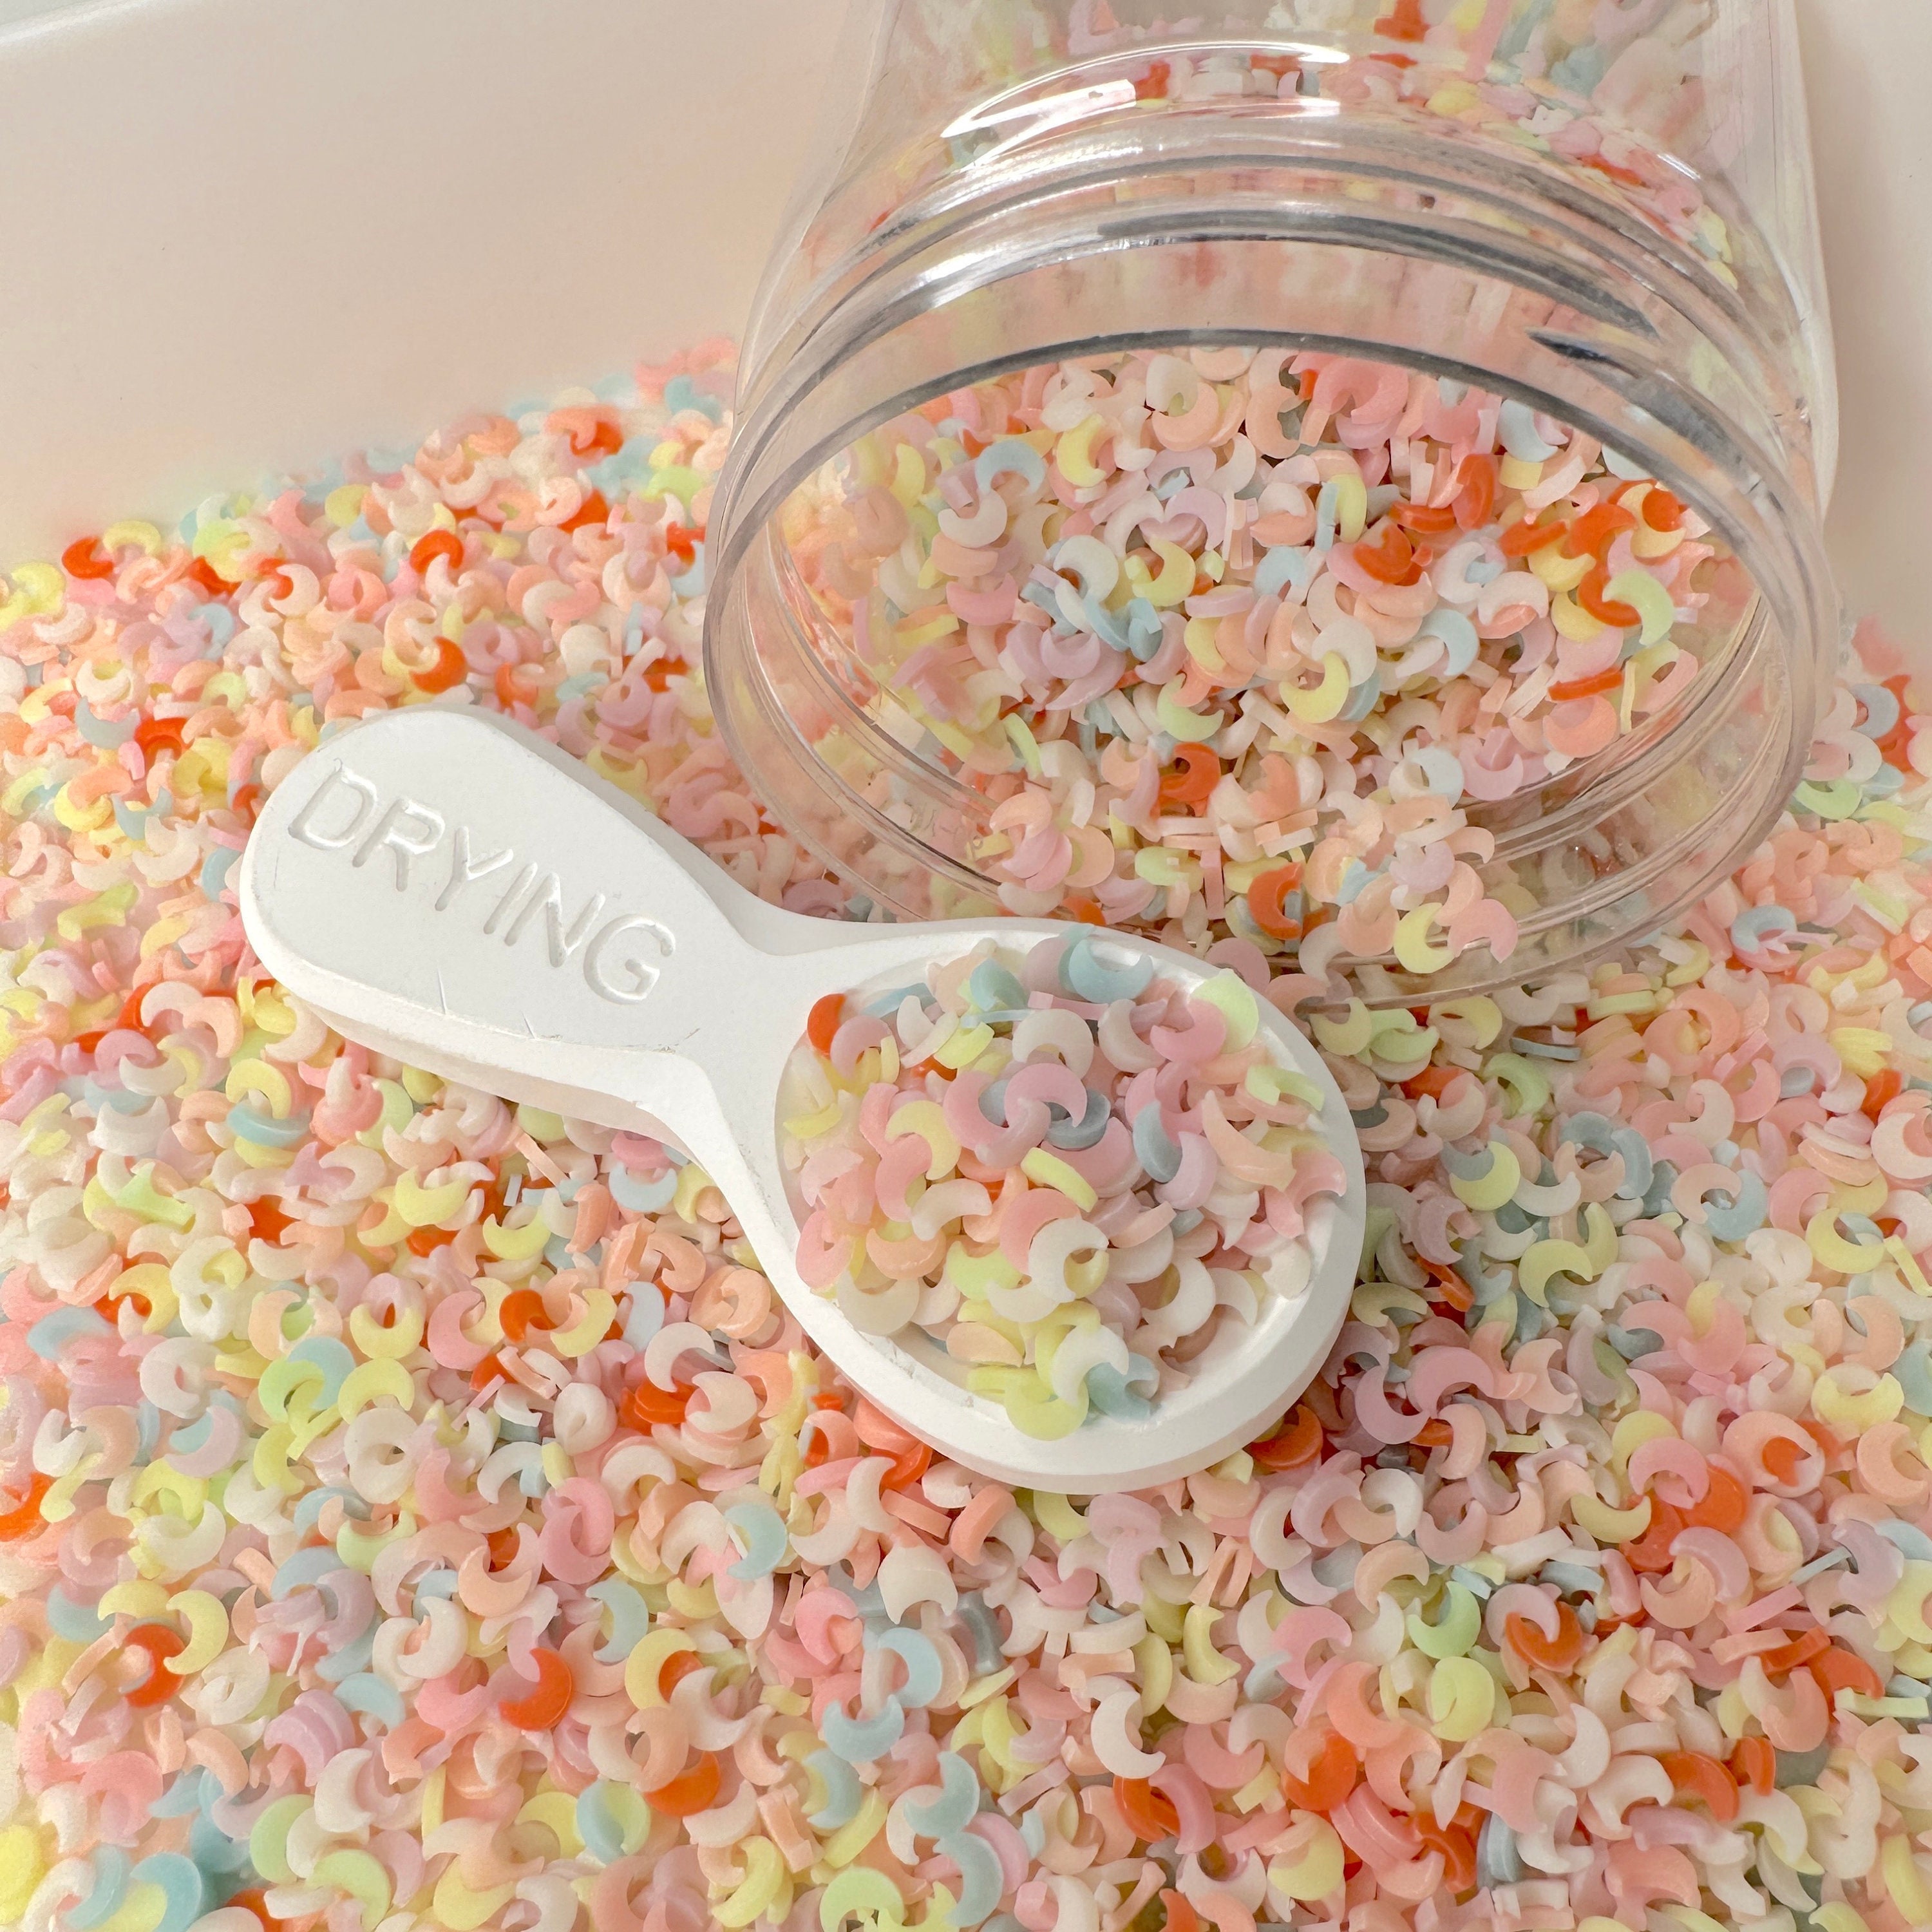 5MM Mixed Stars Polymer Clay Sprinkle Slice (NOT EDIBLE) D12-08